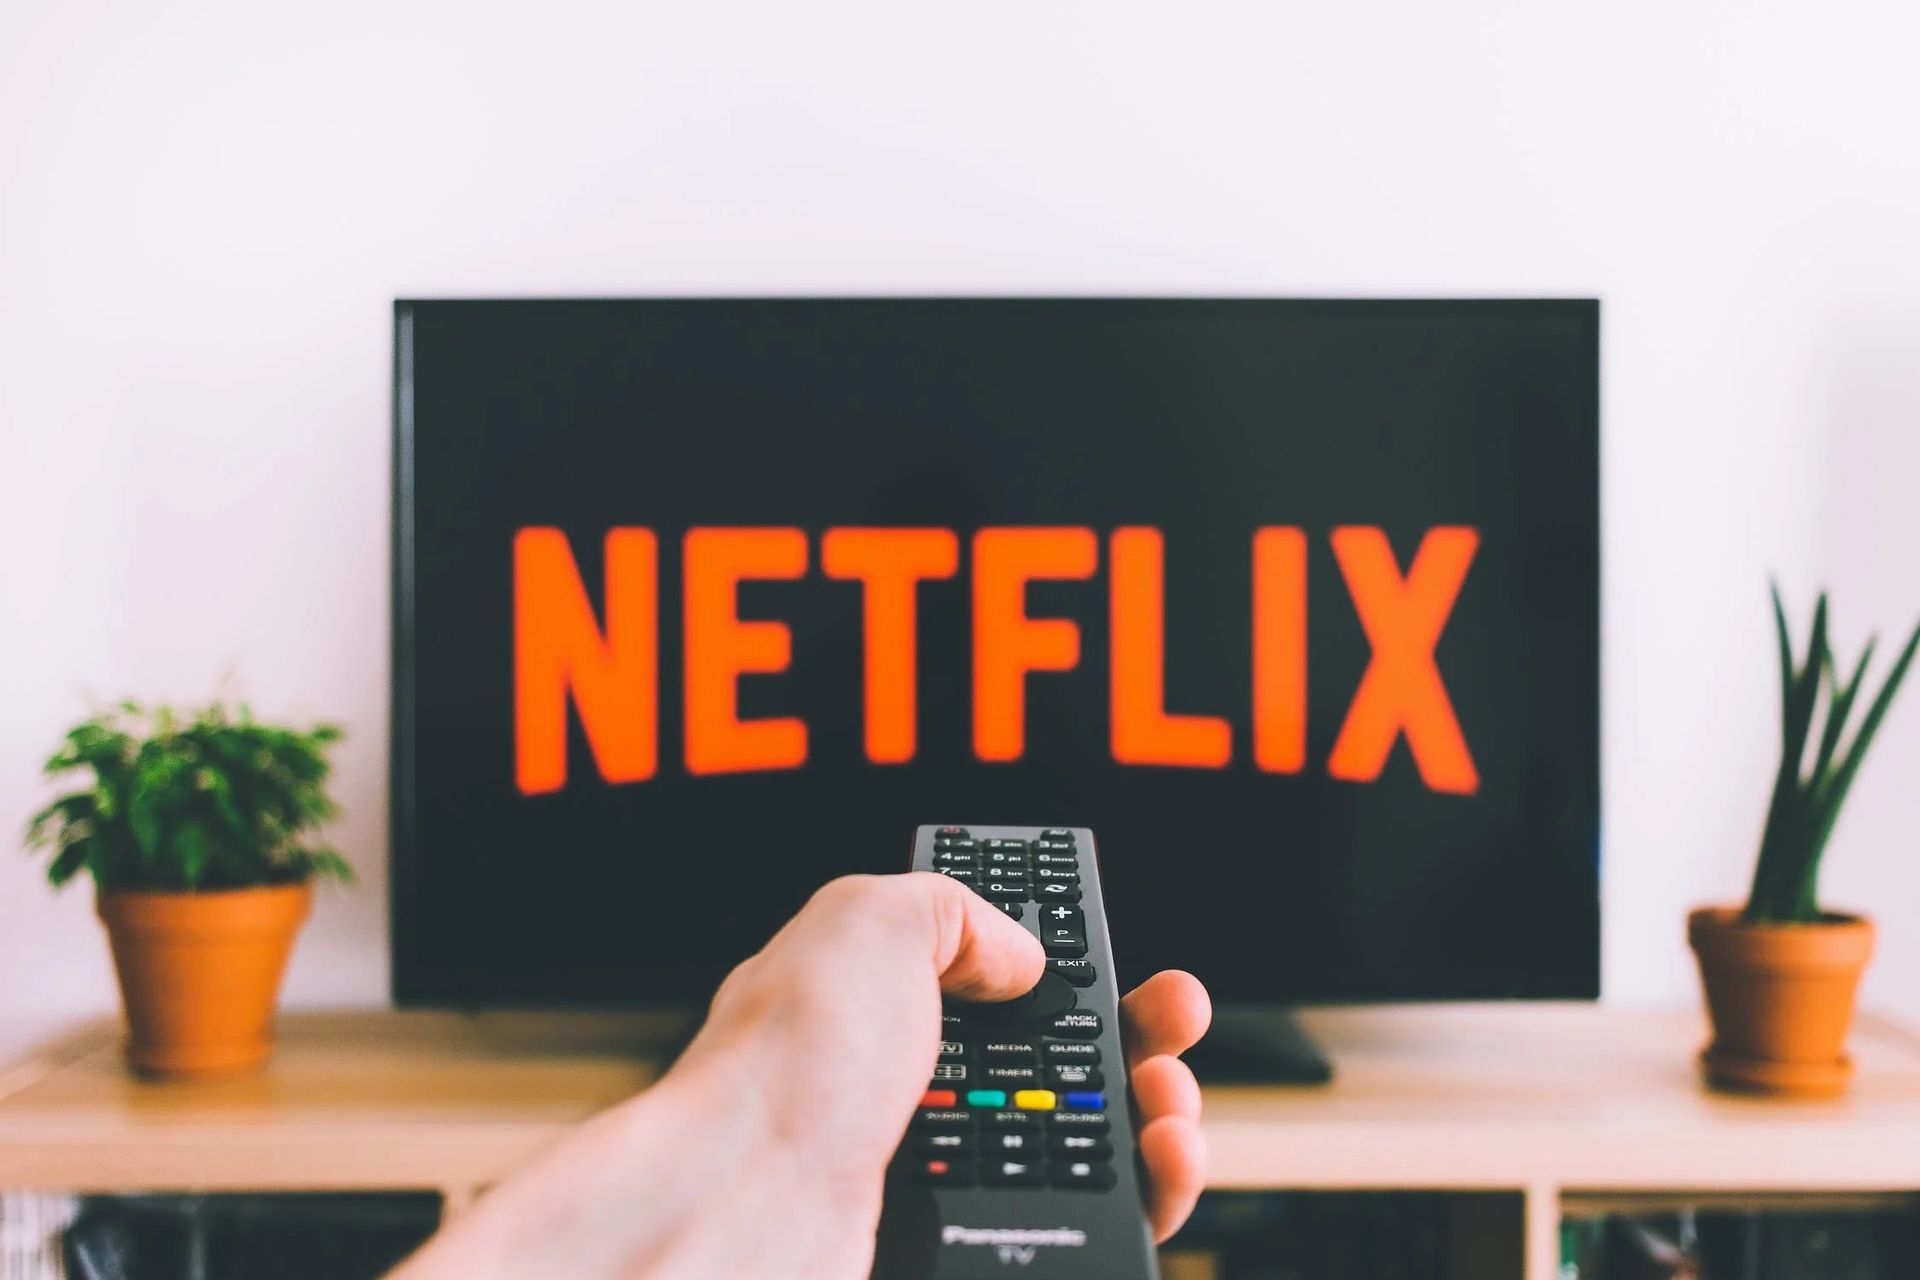 The popular streaming platform Netflix will add live streams to its service soon. Netflix might be a key platform for stand-up artists and other live shows soon